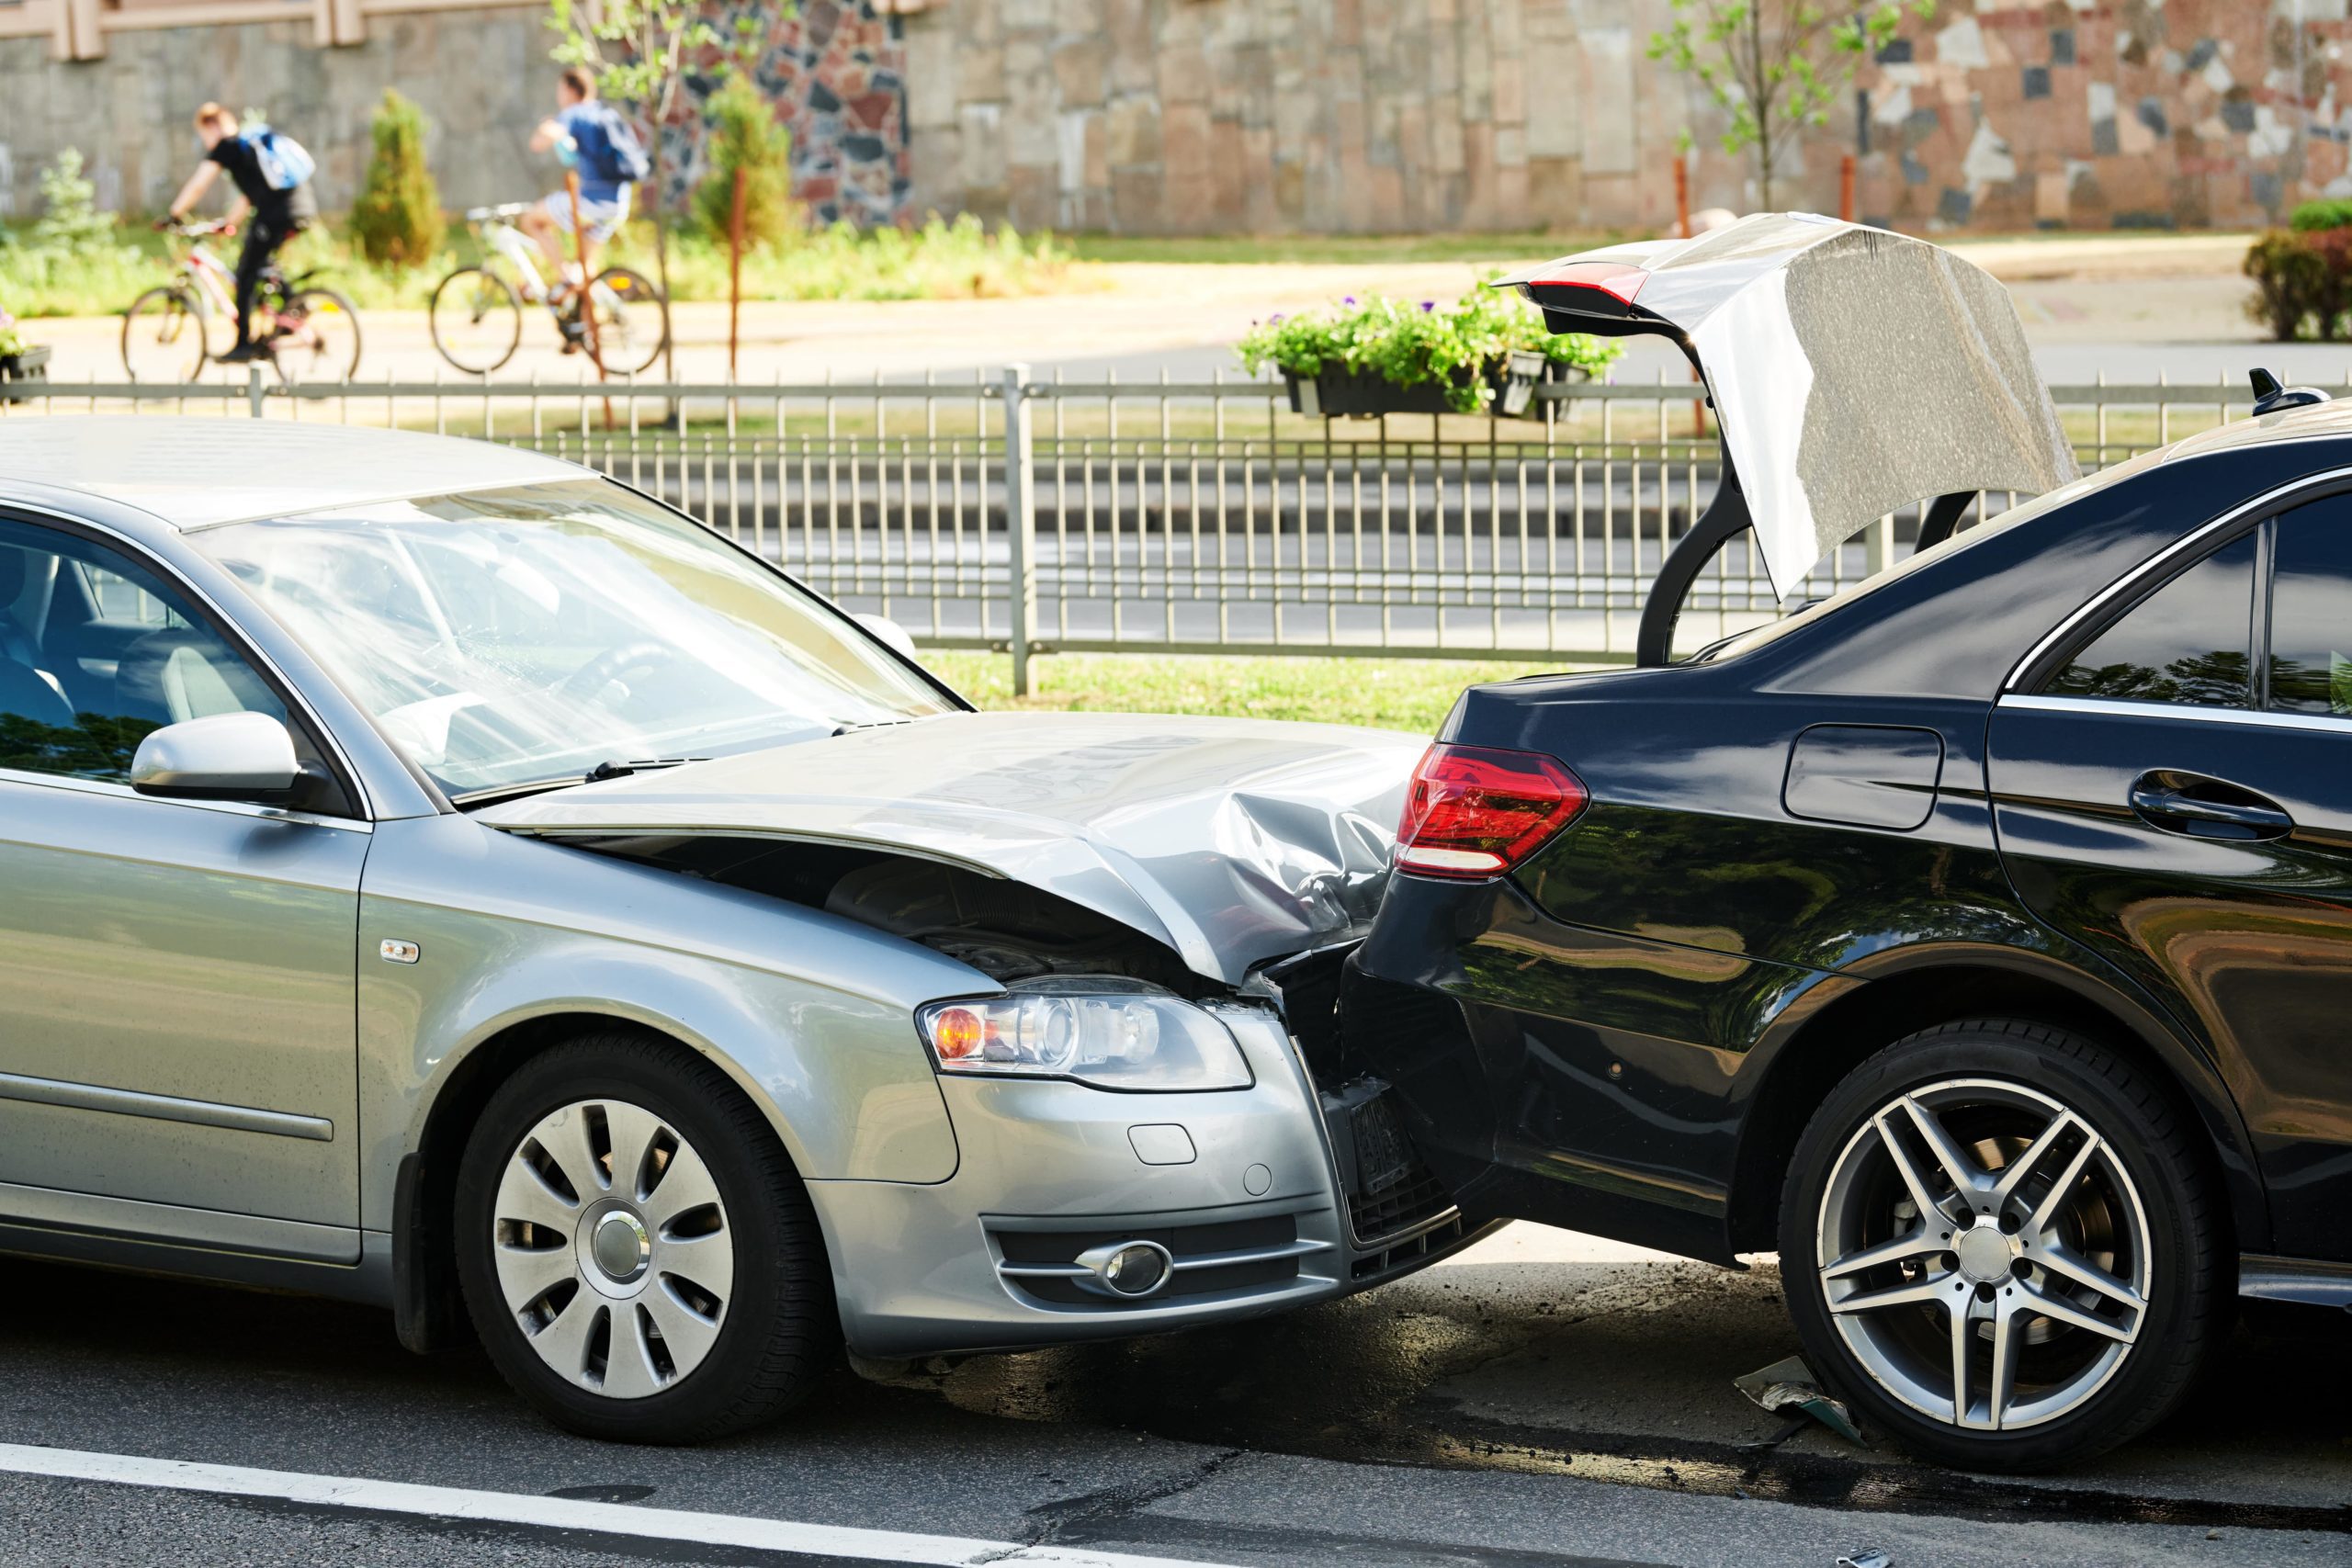 Why You Need a Lawyer After a Montana Car Crash